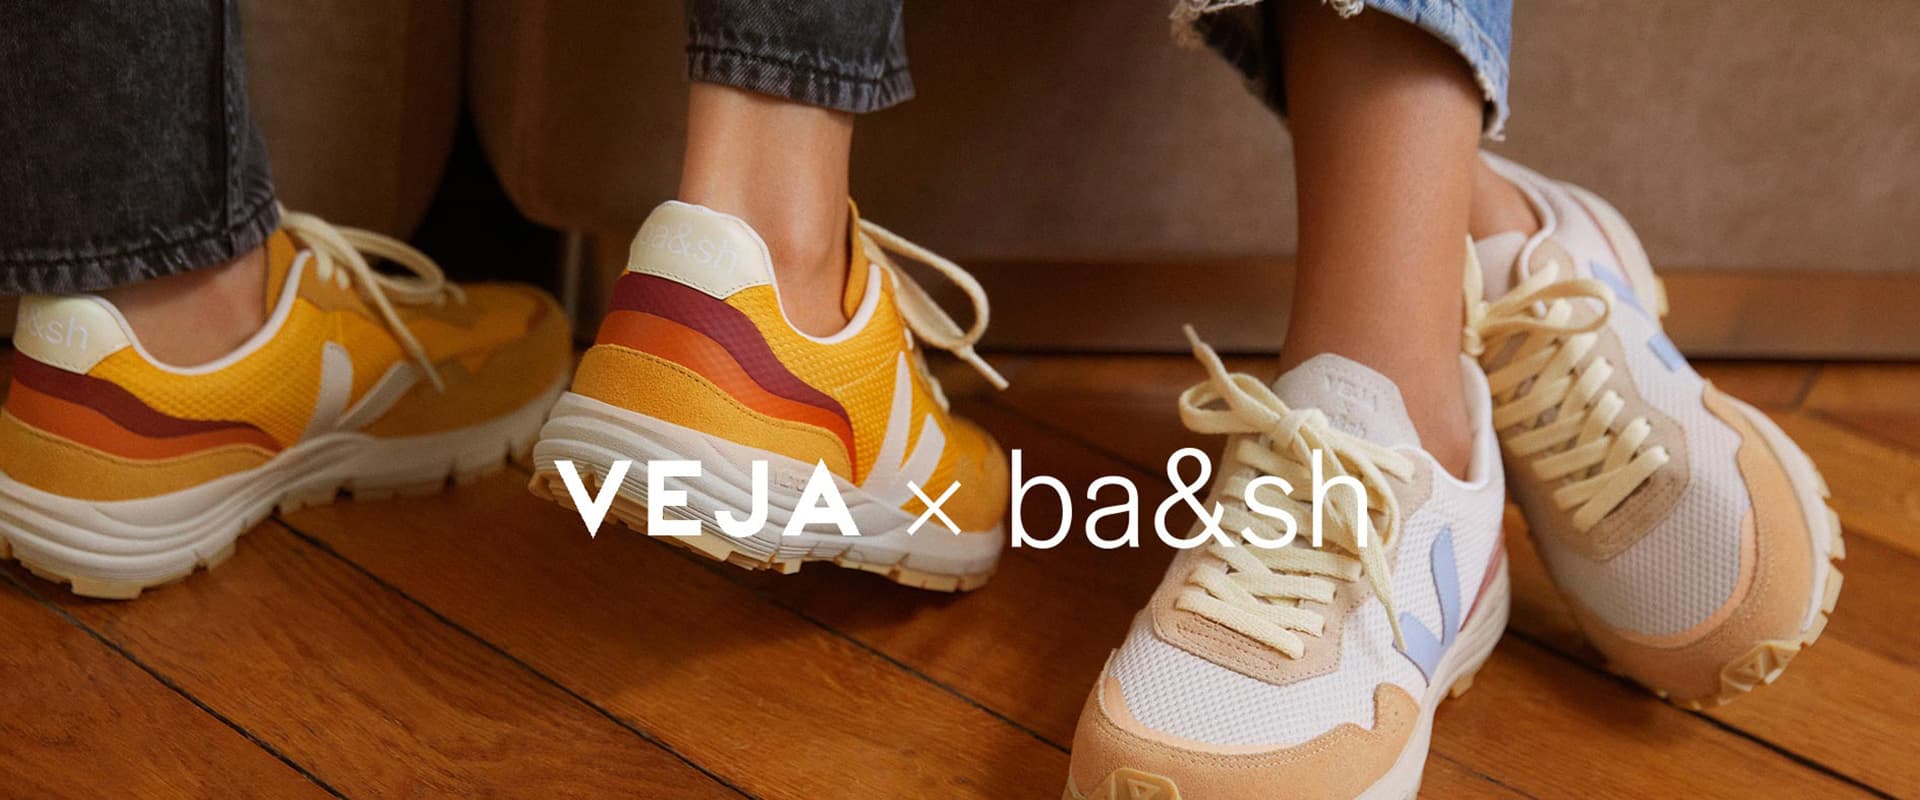 ba&sh new collection, bash shoes, accessories, collab veja x ba&sh, collaboration sneakers, sneakers, yellow, beige, autumn winter 2022